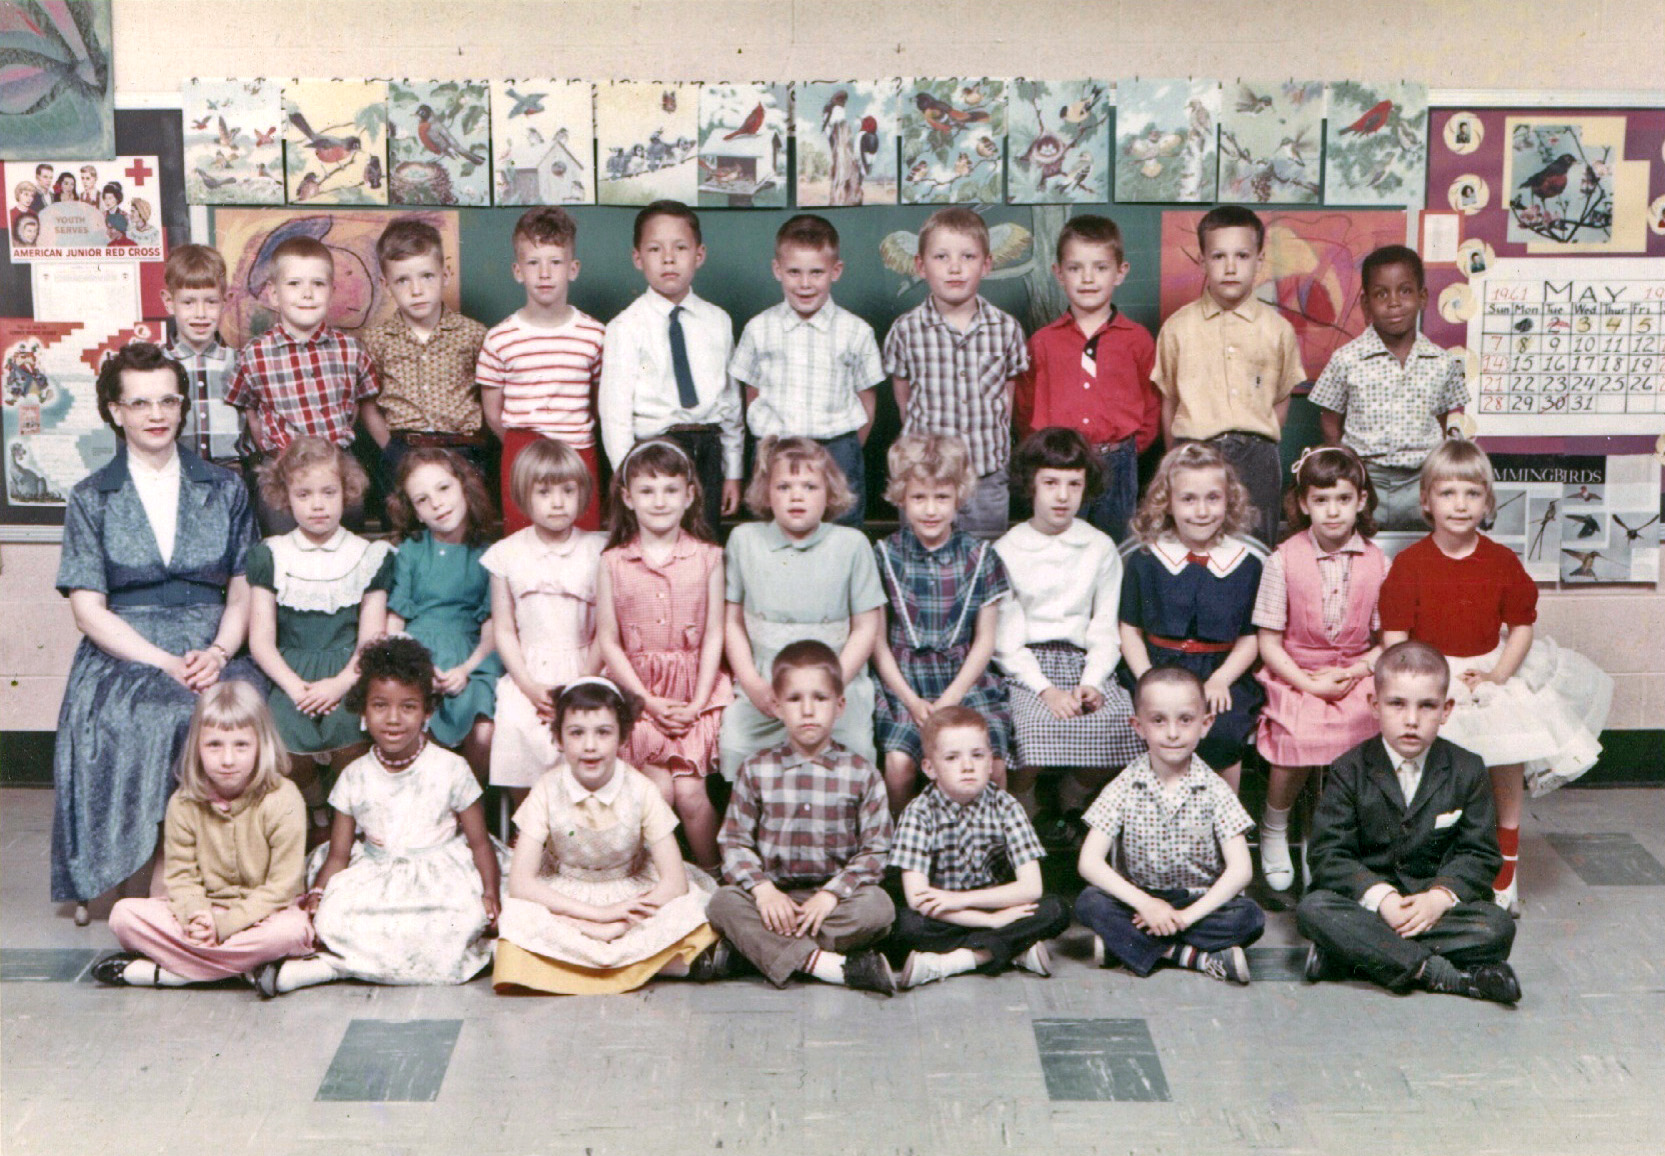 As long as we are sharing school photos, this was my first grade class at James Buchanan Elementary in Levittown, Pennsylvania. Our teacher was. Mrs Alice Stutzman. The date is May 1961 but that is not our classroom. We were in room 5. They set the chairs and camera up in room 1 and every class took their turn going there and posing. I am the girl in green with my head tilted. View full size.